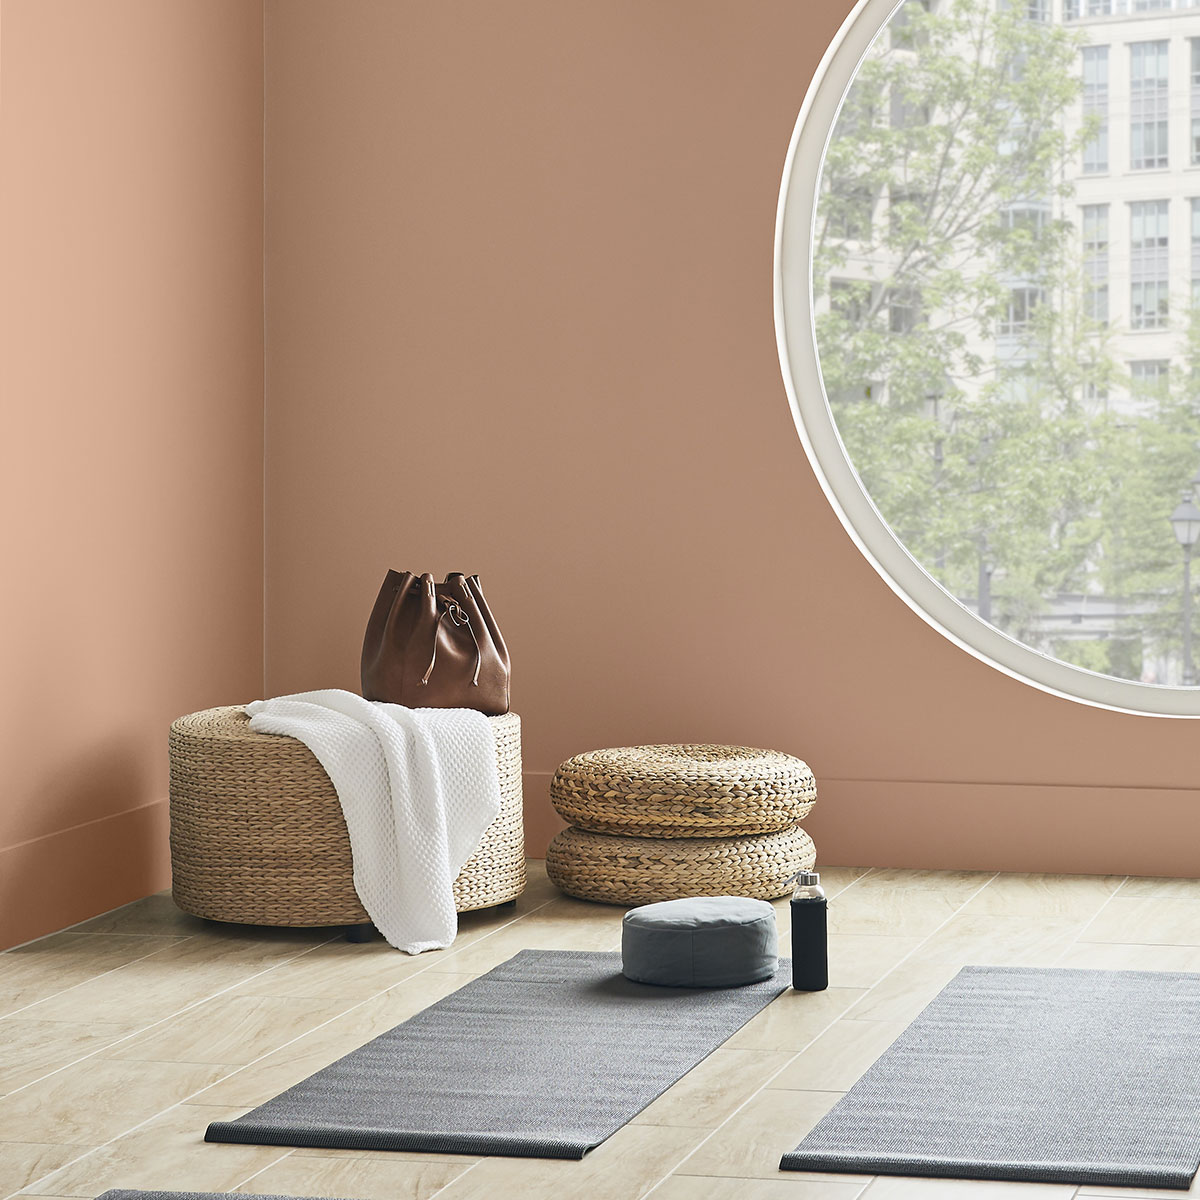 A cropped corner of a workout room with walls painted in Canyon Dusk. There is a large circle window on the wall bringing in a lot of light to the room. A rattan ottoman with a towel and purse placed on top sits in the corner. On the ground are yoga mats.